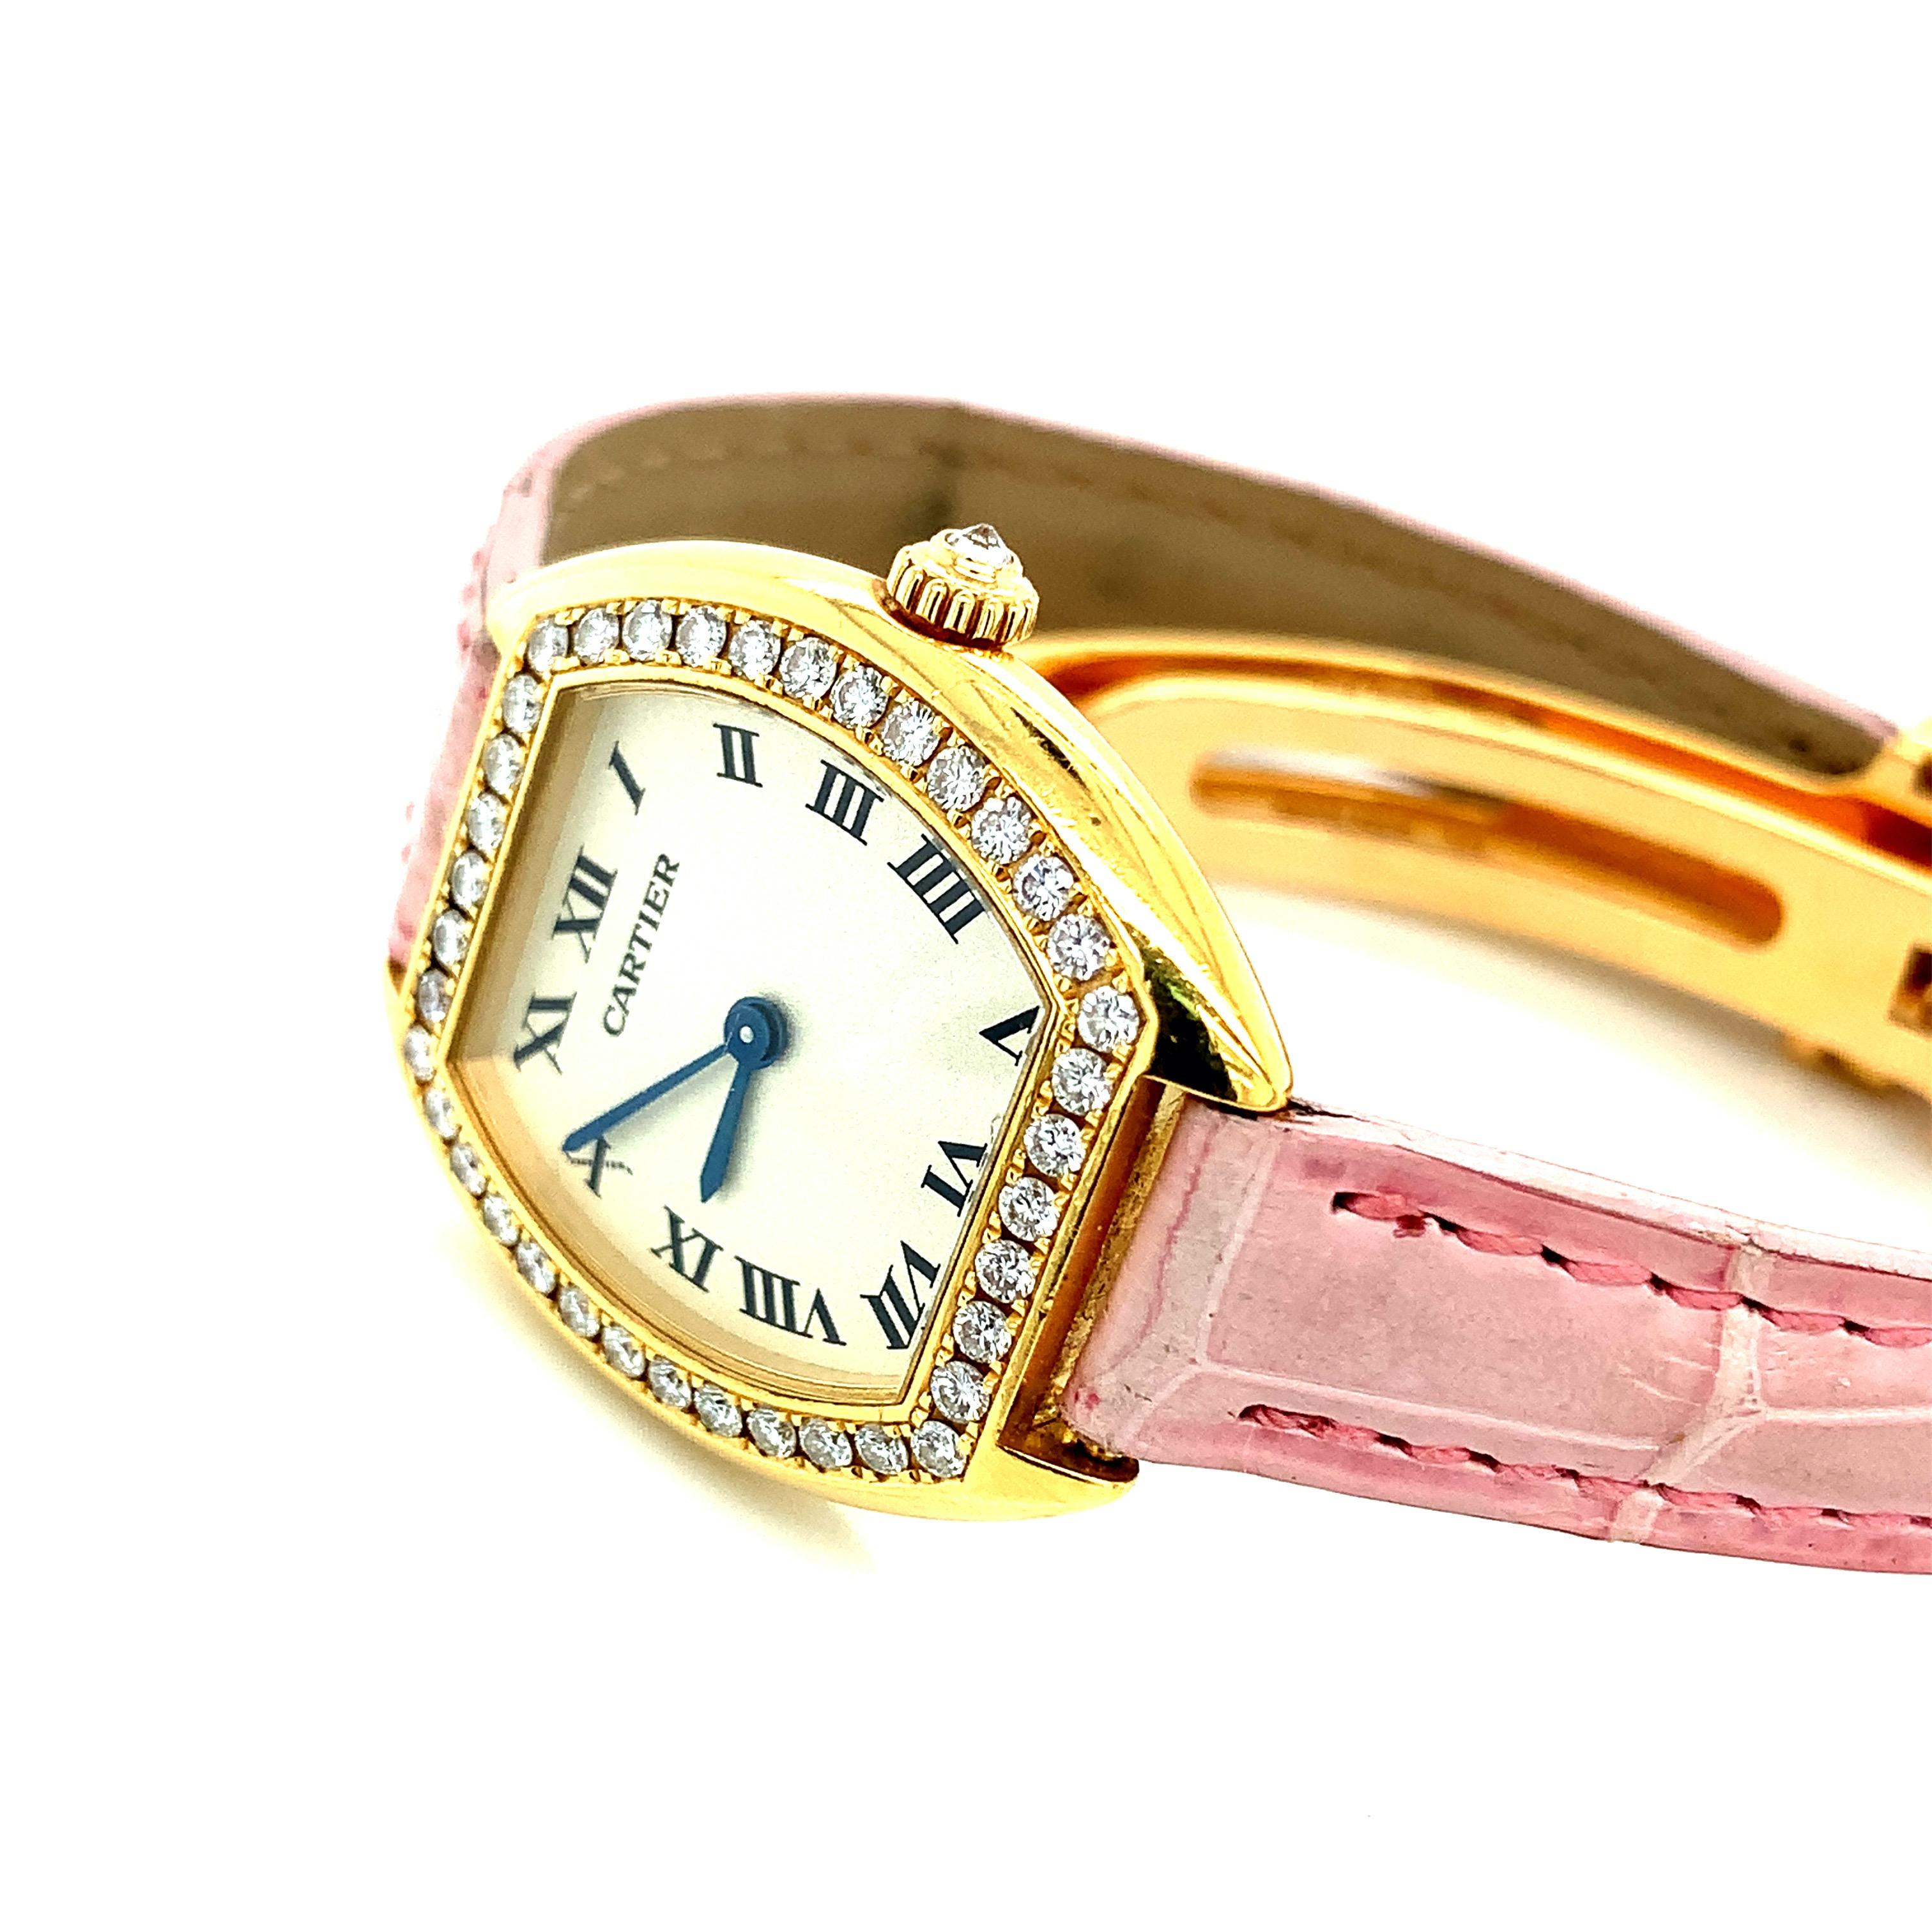 Cartier 18 karat yellow gold wristwatch with pink leather bands. Made in Switzerland, 1945. Serial no. MG214956. Marked: Cartier / Water Resistant / Swiss made / 18K / 1945 / MG214956. Total weight: 35.4 grams. Case measurements: width 2.4 cm,